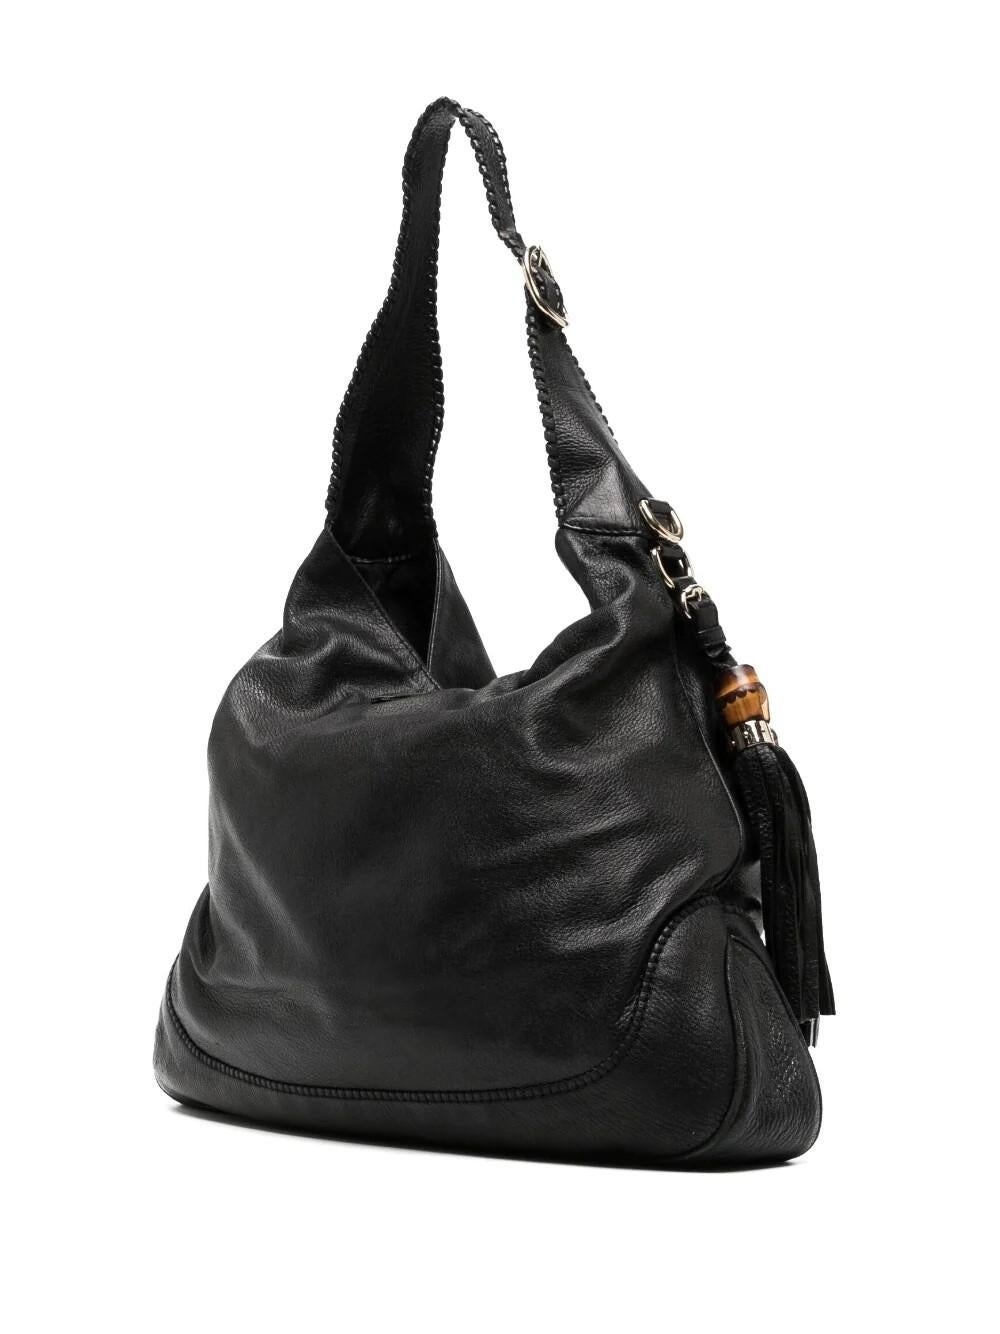 The Gucci Indy Jackie Hobo bag is a classic staple from the 2010 Resort Collection. Crafted from supple black grained leather and bamboo tassels, the design features silver hardware with the iconic 'Jackie' front closure, a braided shoulder strap